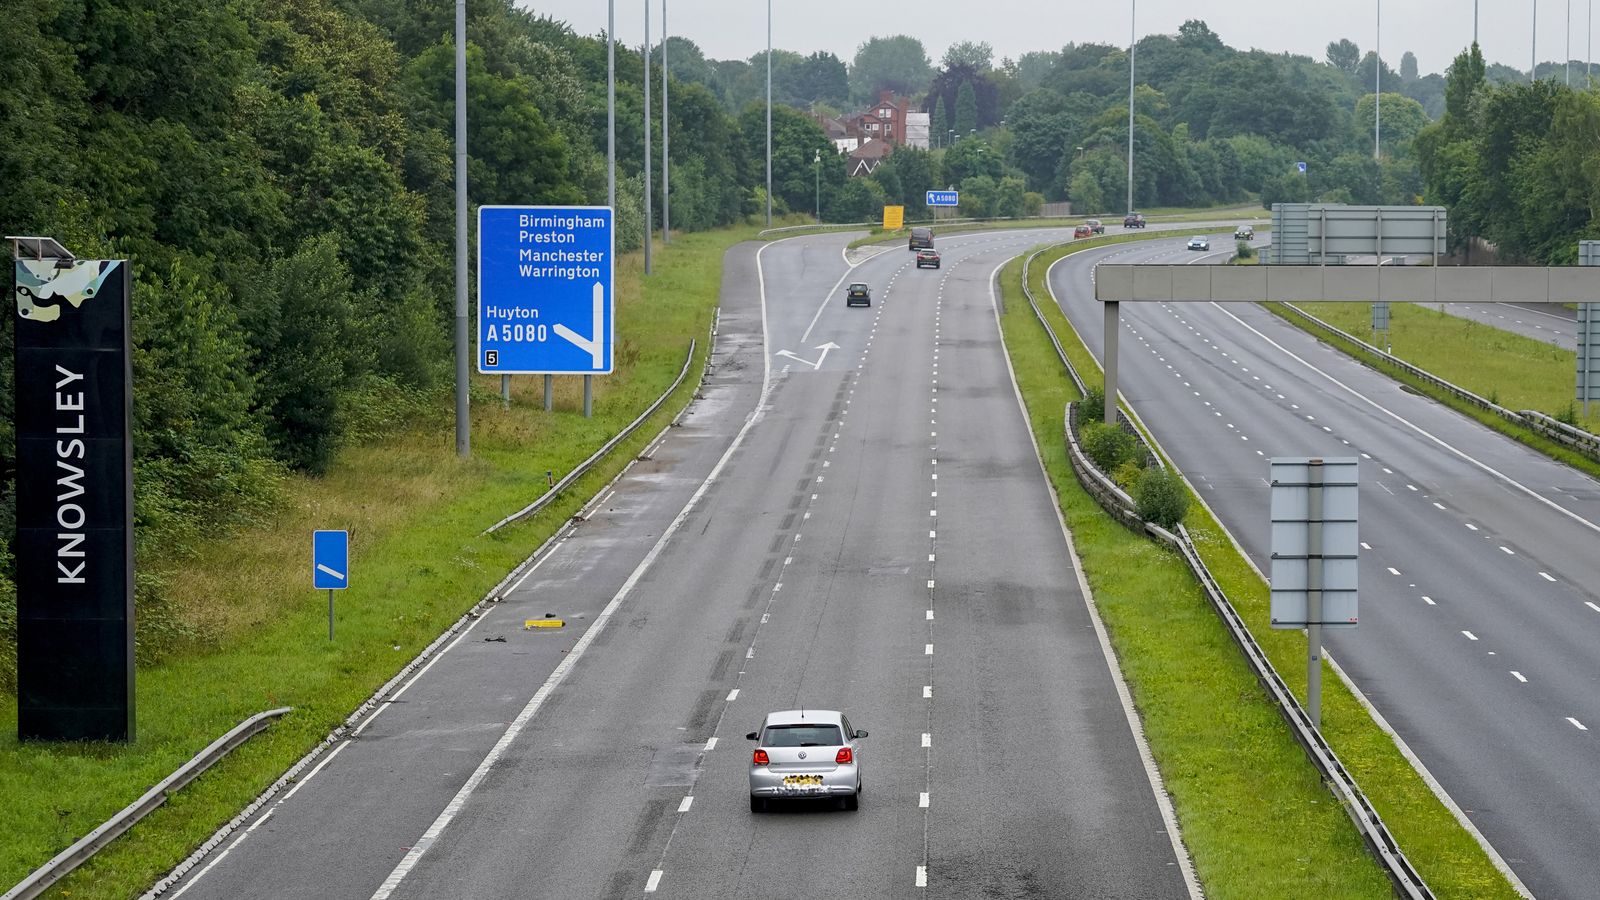 Middle lane hogging targeted by national campaign